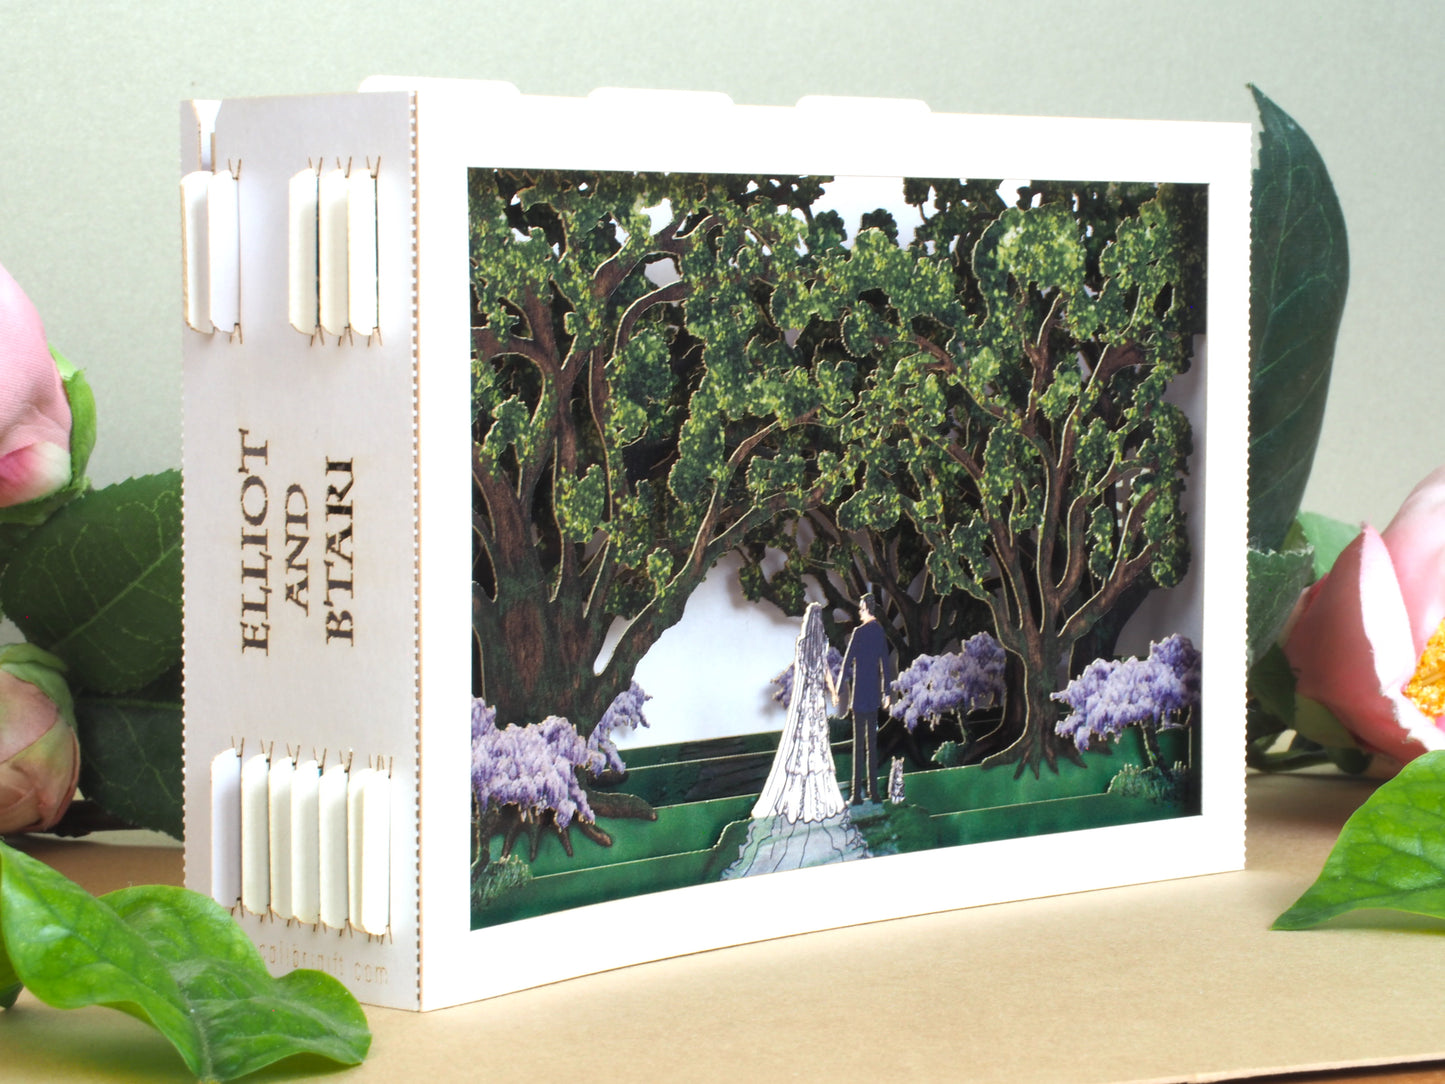 Oak park alley wedding invitation. Paper pop-up box cards. Wedding stationary. Bride and groom figures, cat, trees.